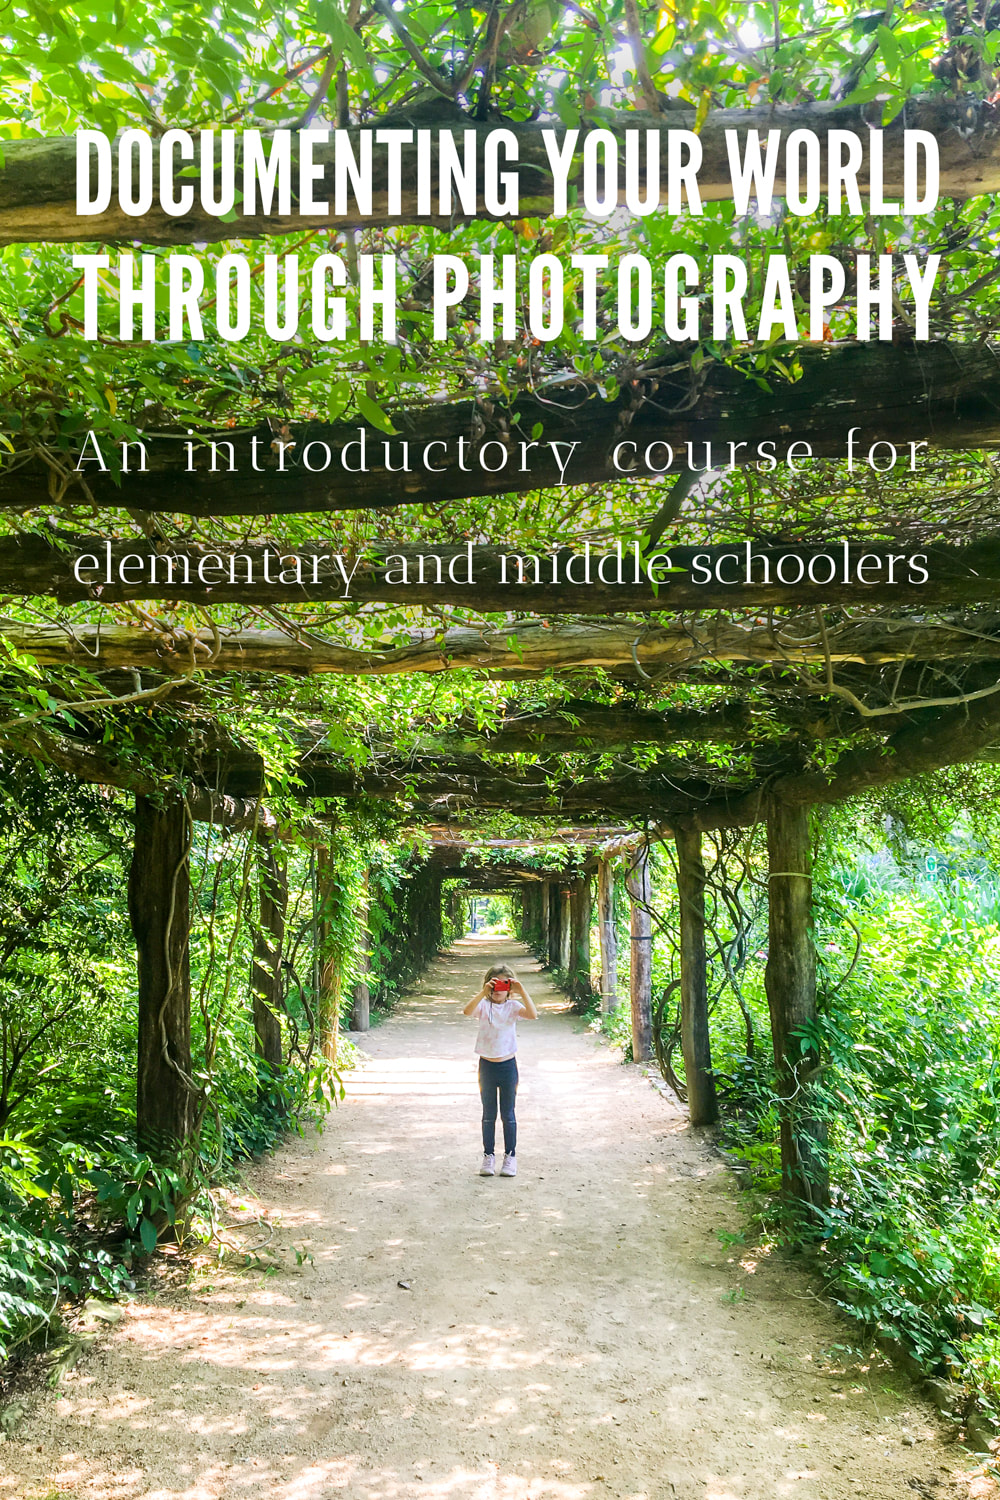 A fantastic intro photography e-class for kids! It's a PDF and they can just use a mobile phone camera. You don't need photography experience to teach the class. Documenting Your World: An Introductory Course for Elementary and Middle Schoolers. By Julia Soplop of Calm Cradle Photo & Design